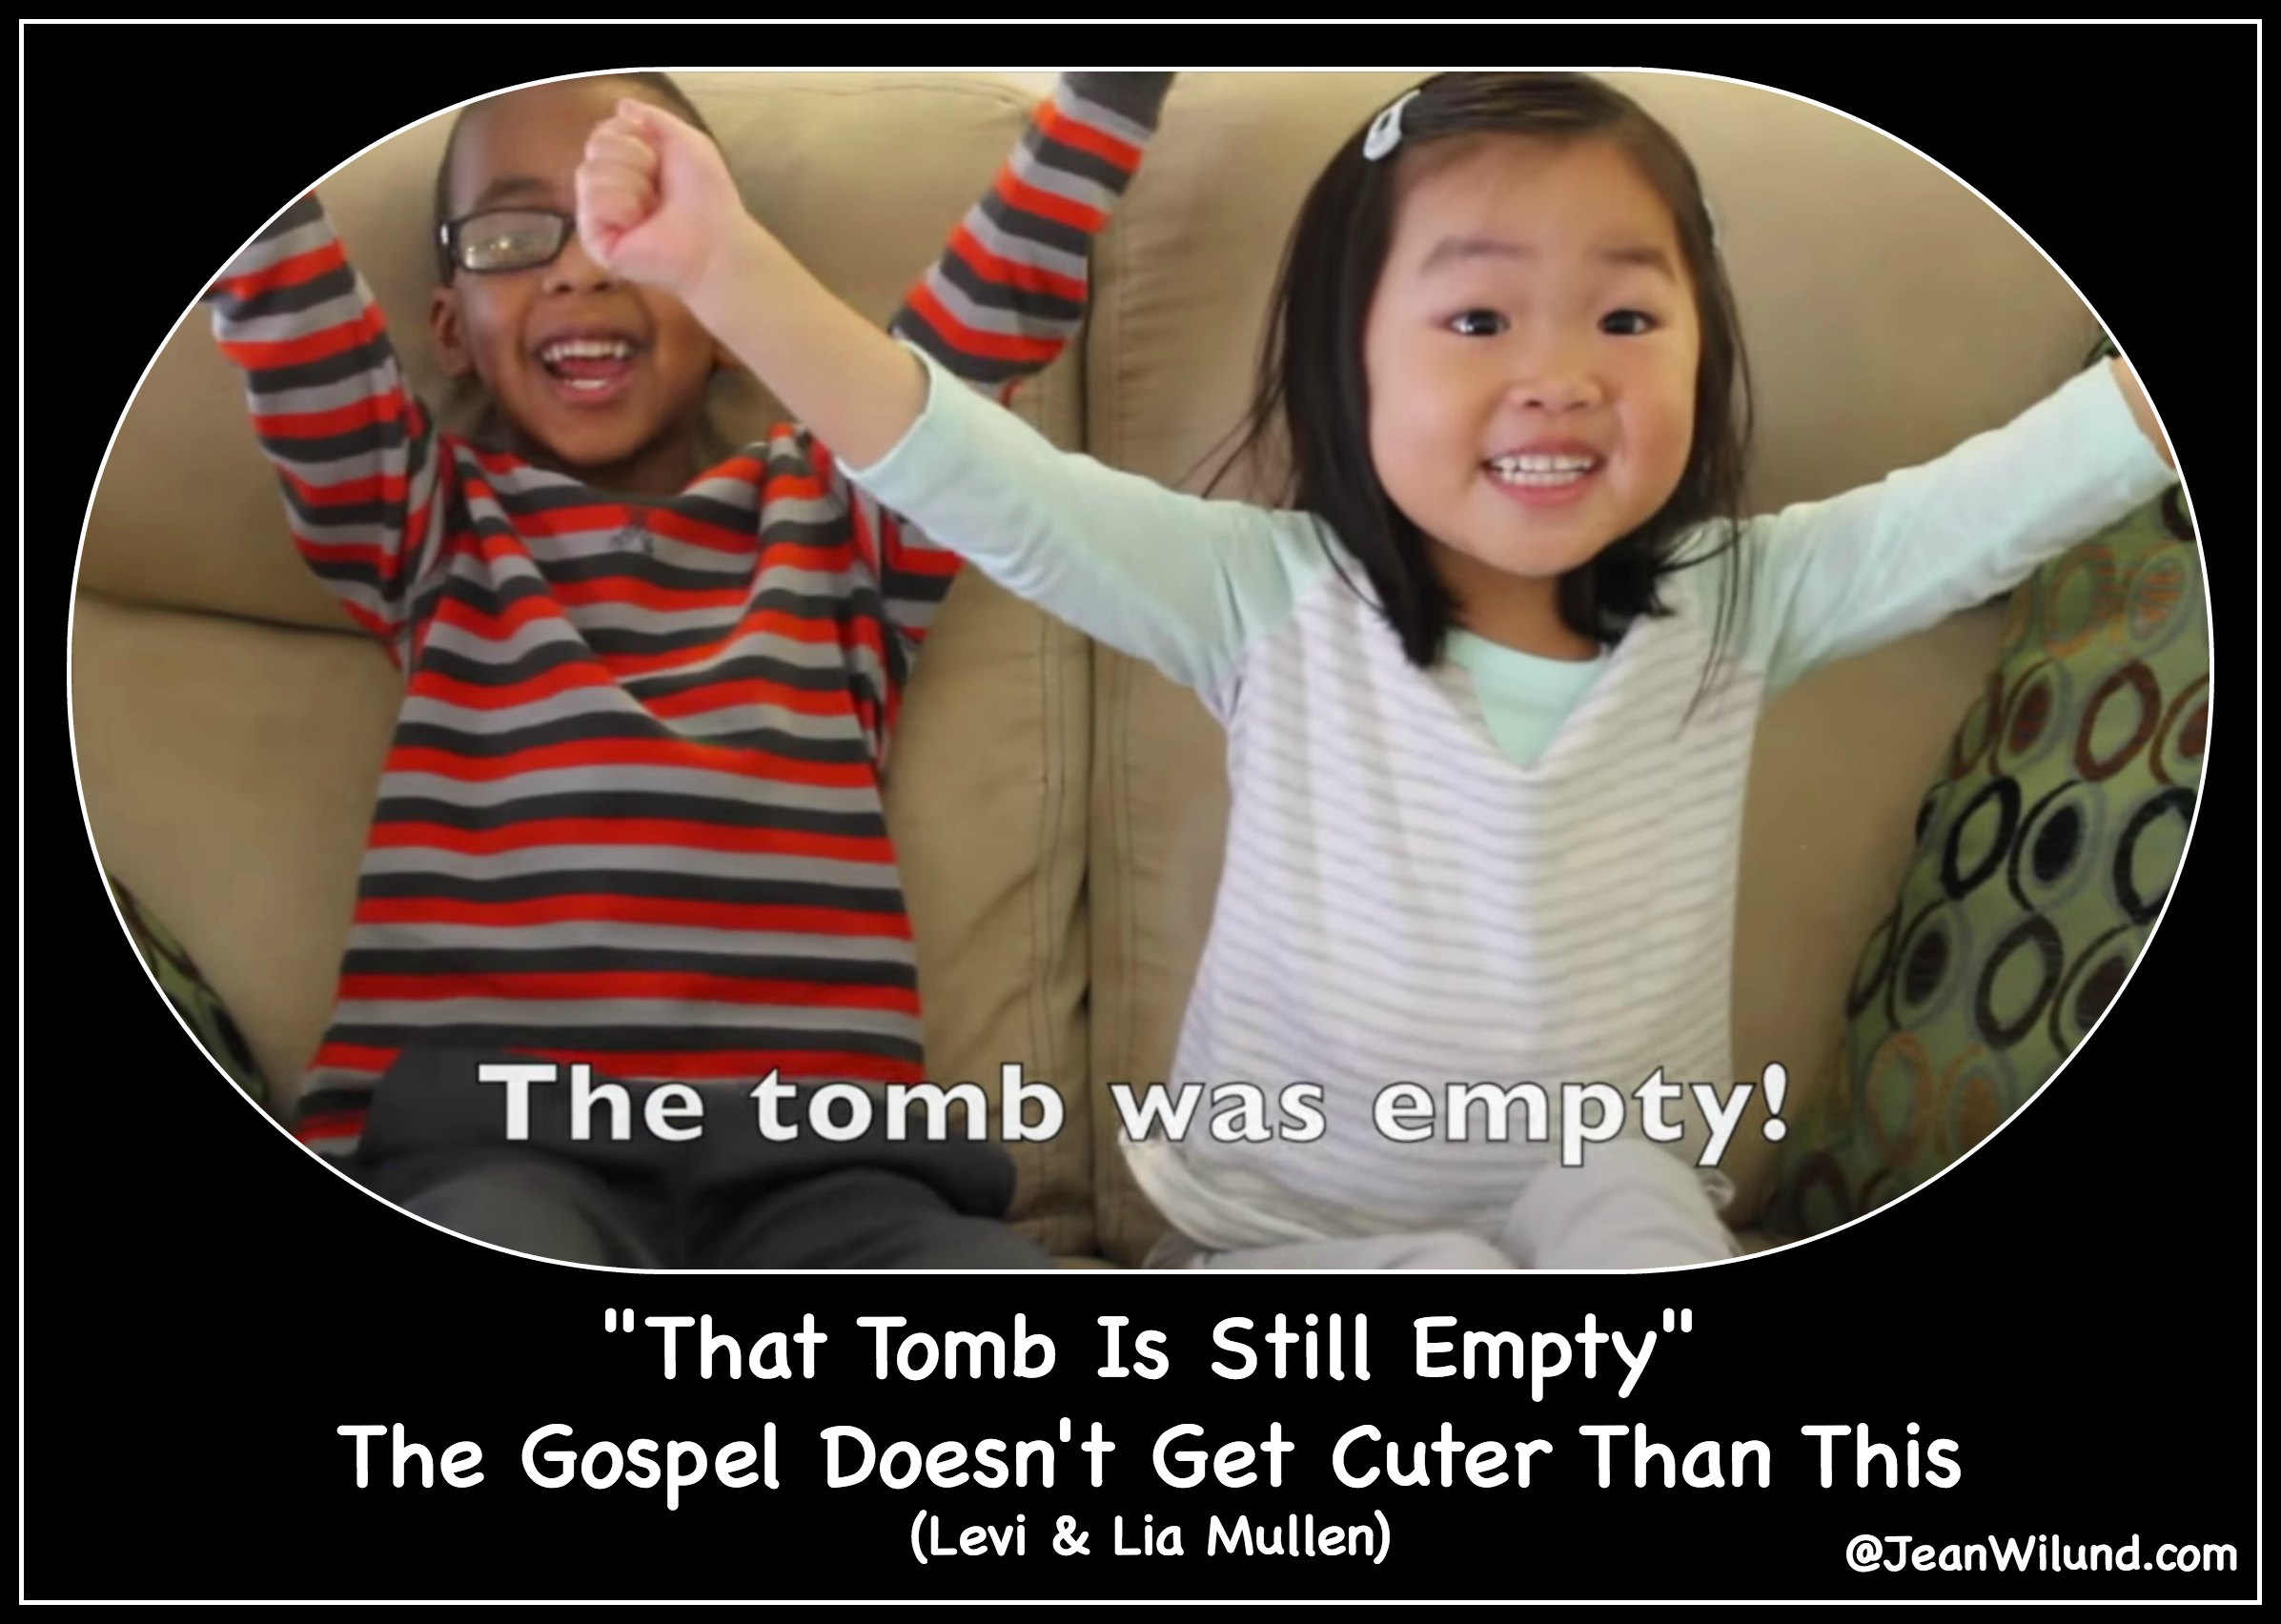 Click to view "That Tomb is Still Empty" by Levi & Lia Mullen. The Gospel doesn't get cuter! via www.jeanwilund.com